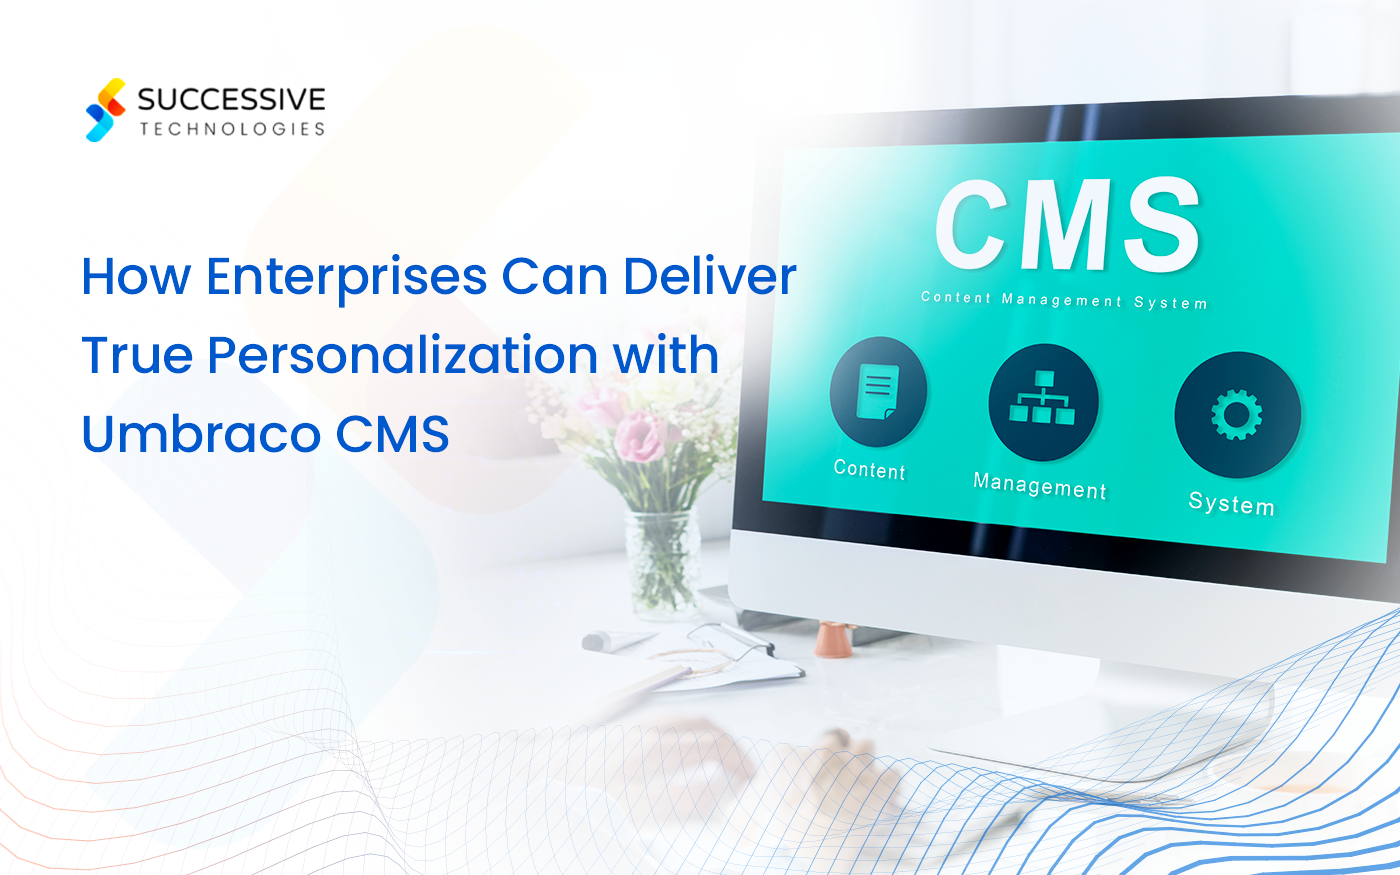 How Enterprises Can Deliver True Personalization with Umbraco CMS